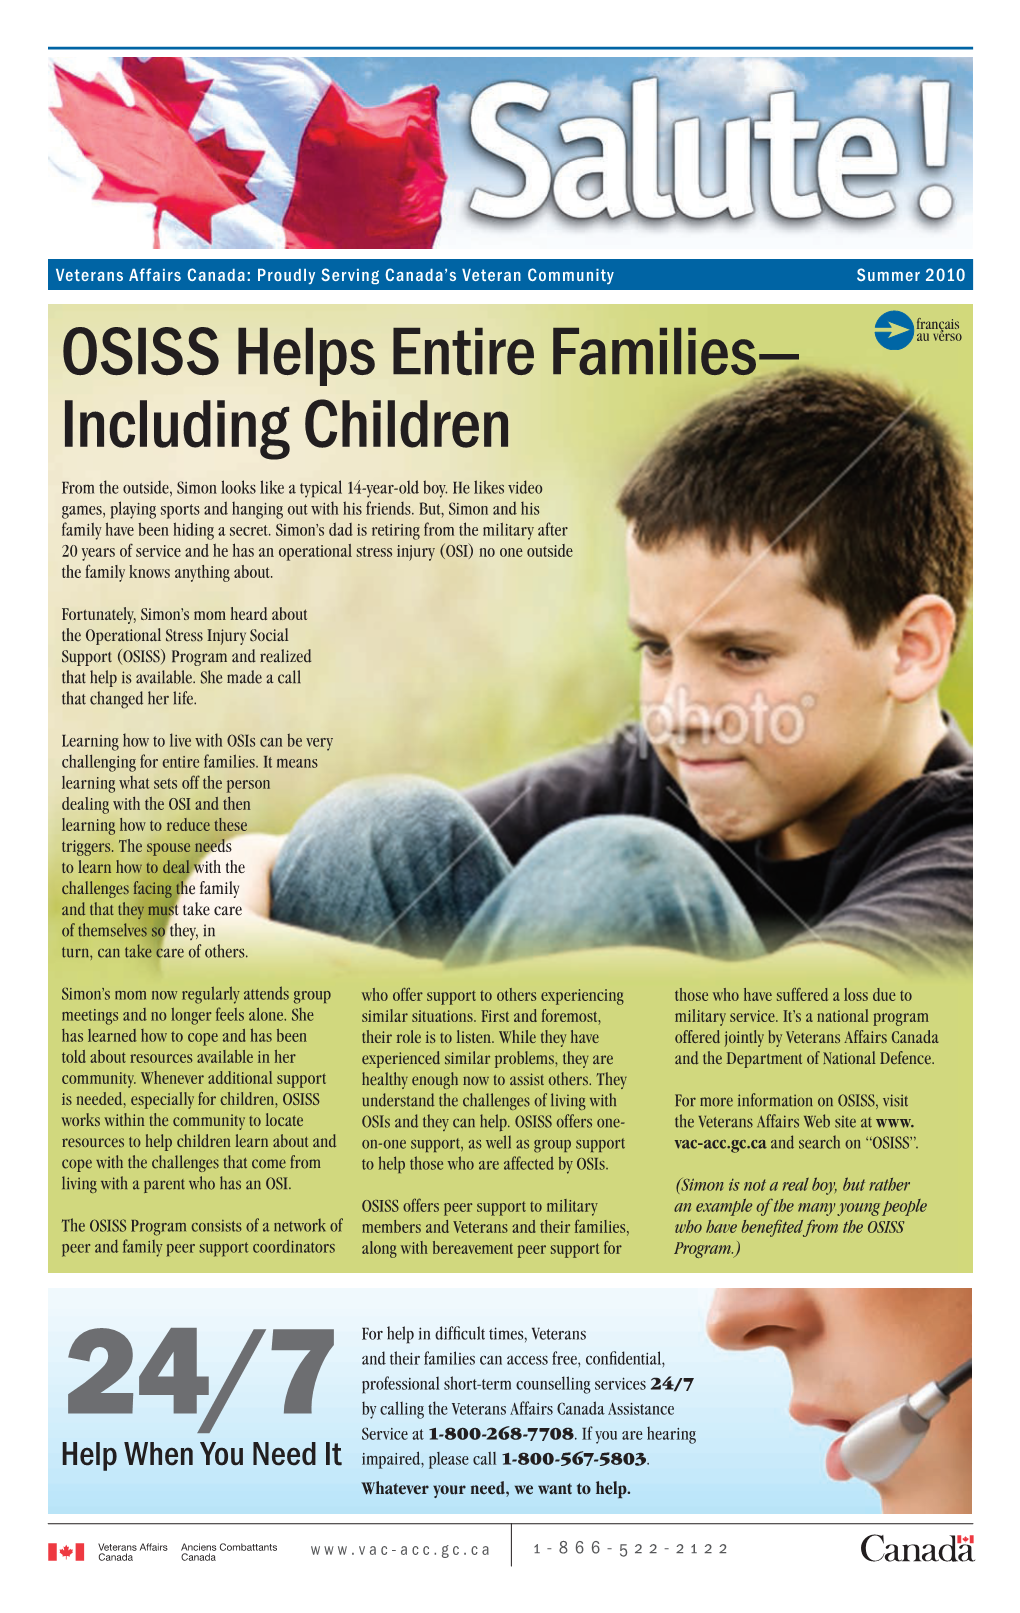 OSISS Helps Entire Families— Including Children from the Outside, Simon Looks Like a Typical 14-Year-Old Boy